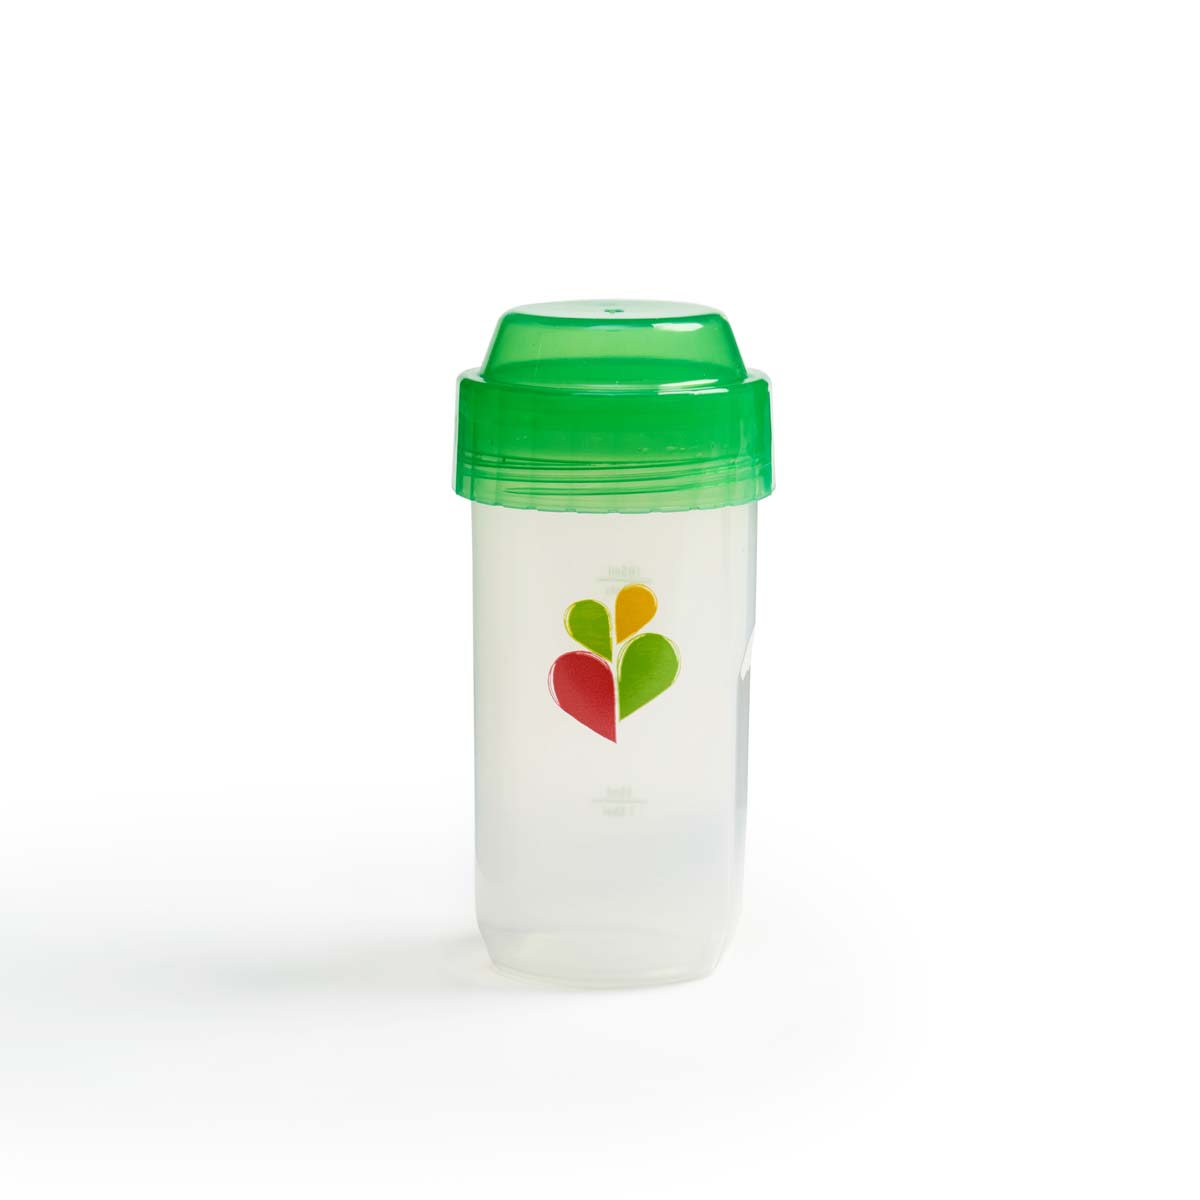 Shaker with 15% discount